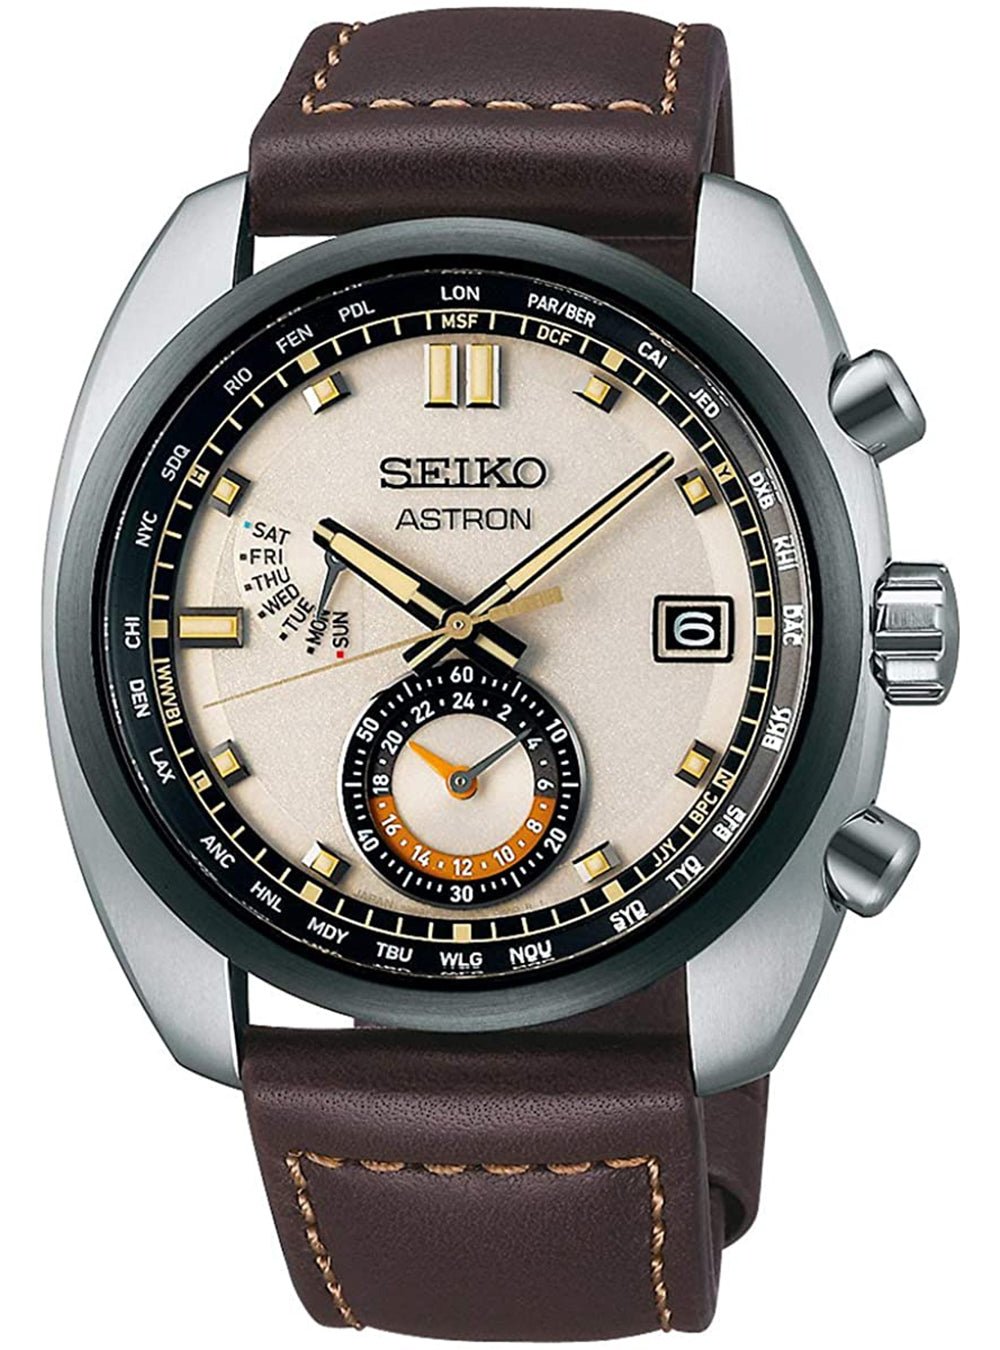 SEIKO ASTRON SBXY005 MADE IN JAPAN JDM